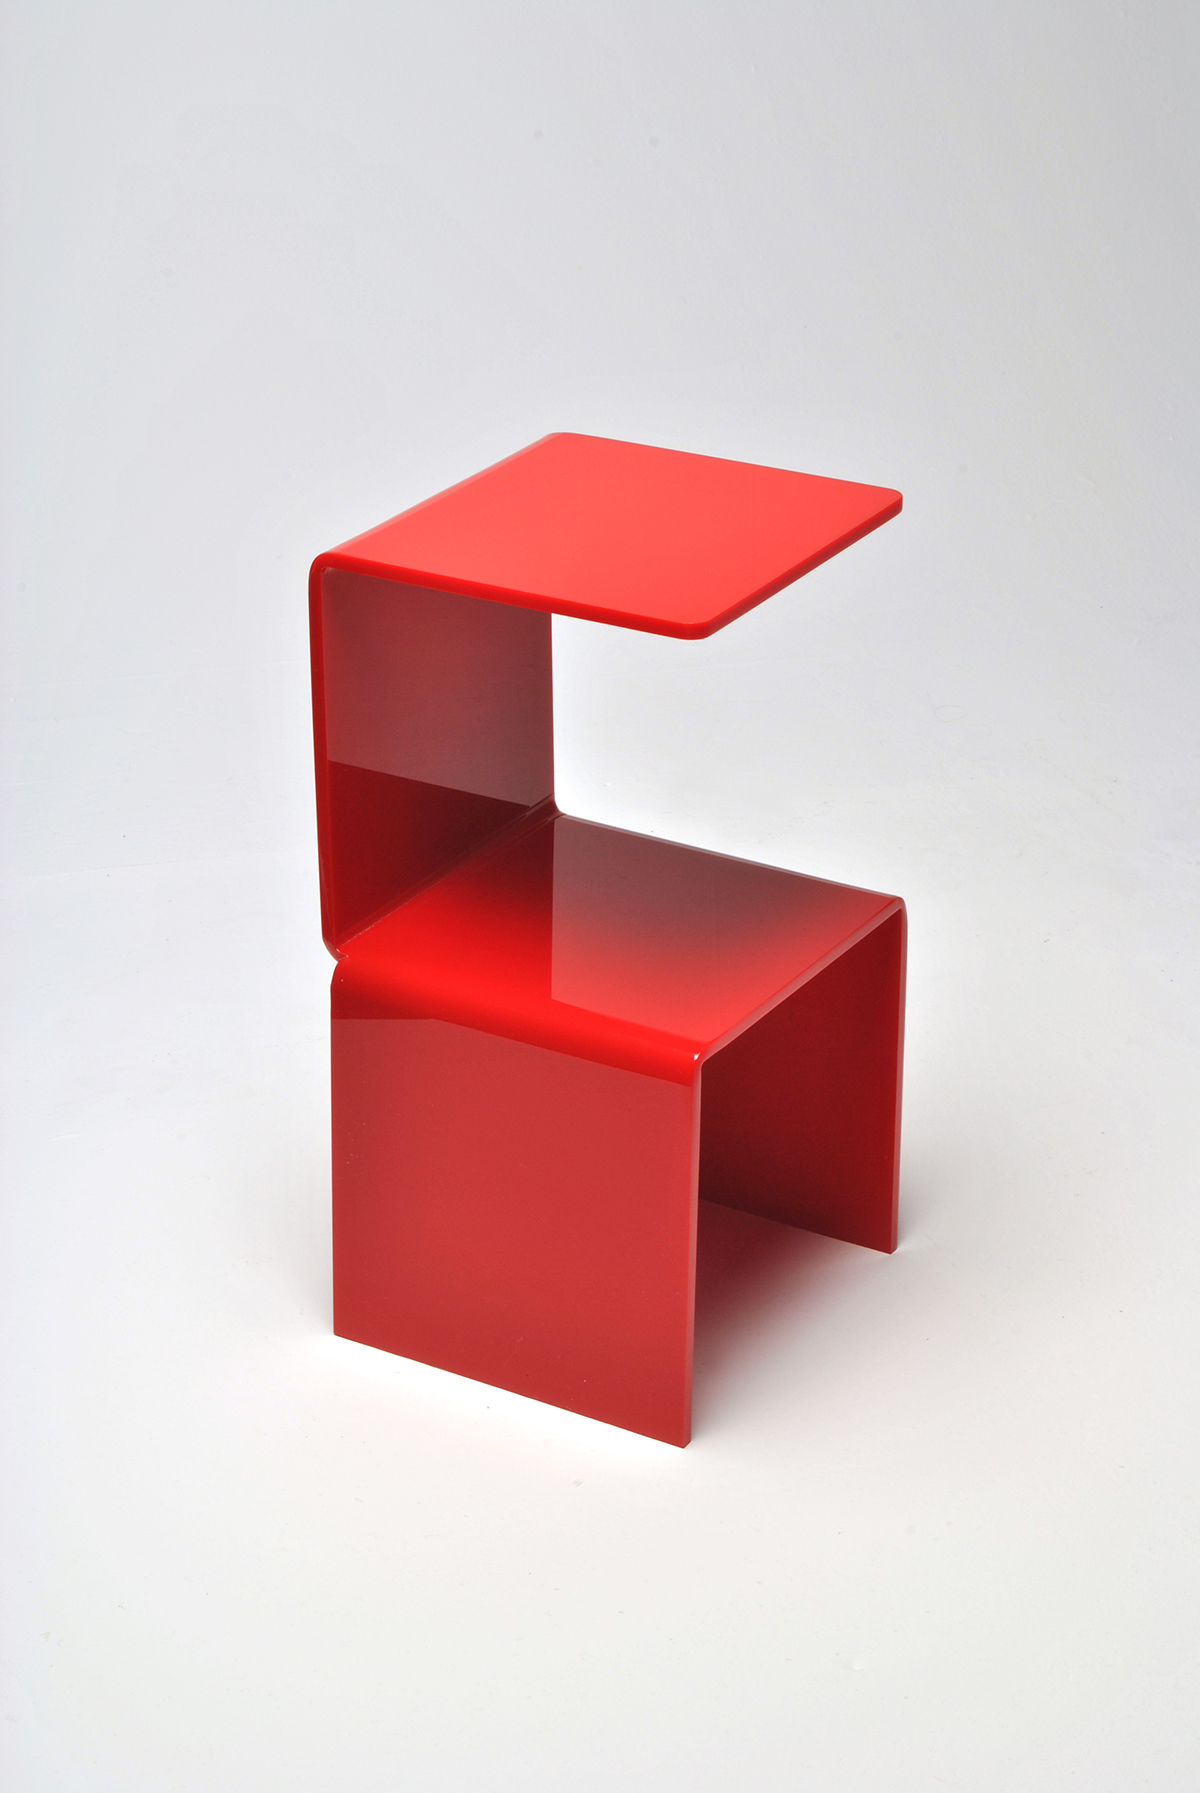 vermelha side table mesa lateral.hugo sigaud design red